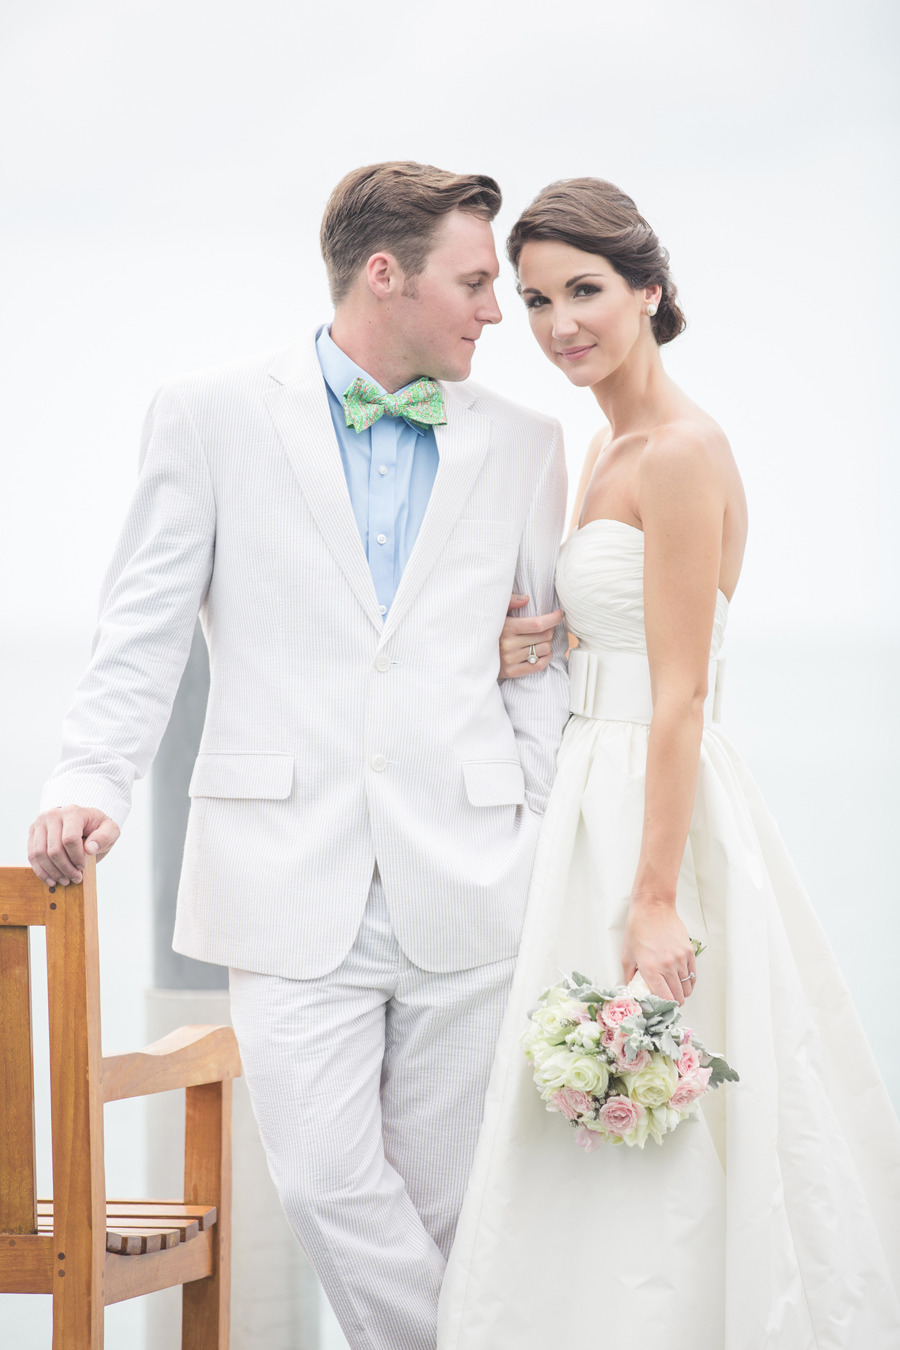 Pastel wedding Colors palette { Mint, Lucite green and gold } Photography: 13:13 - 1313photography.com/